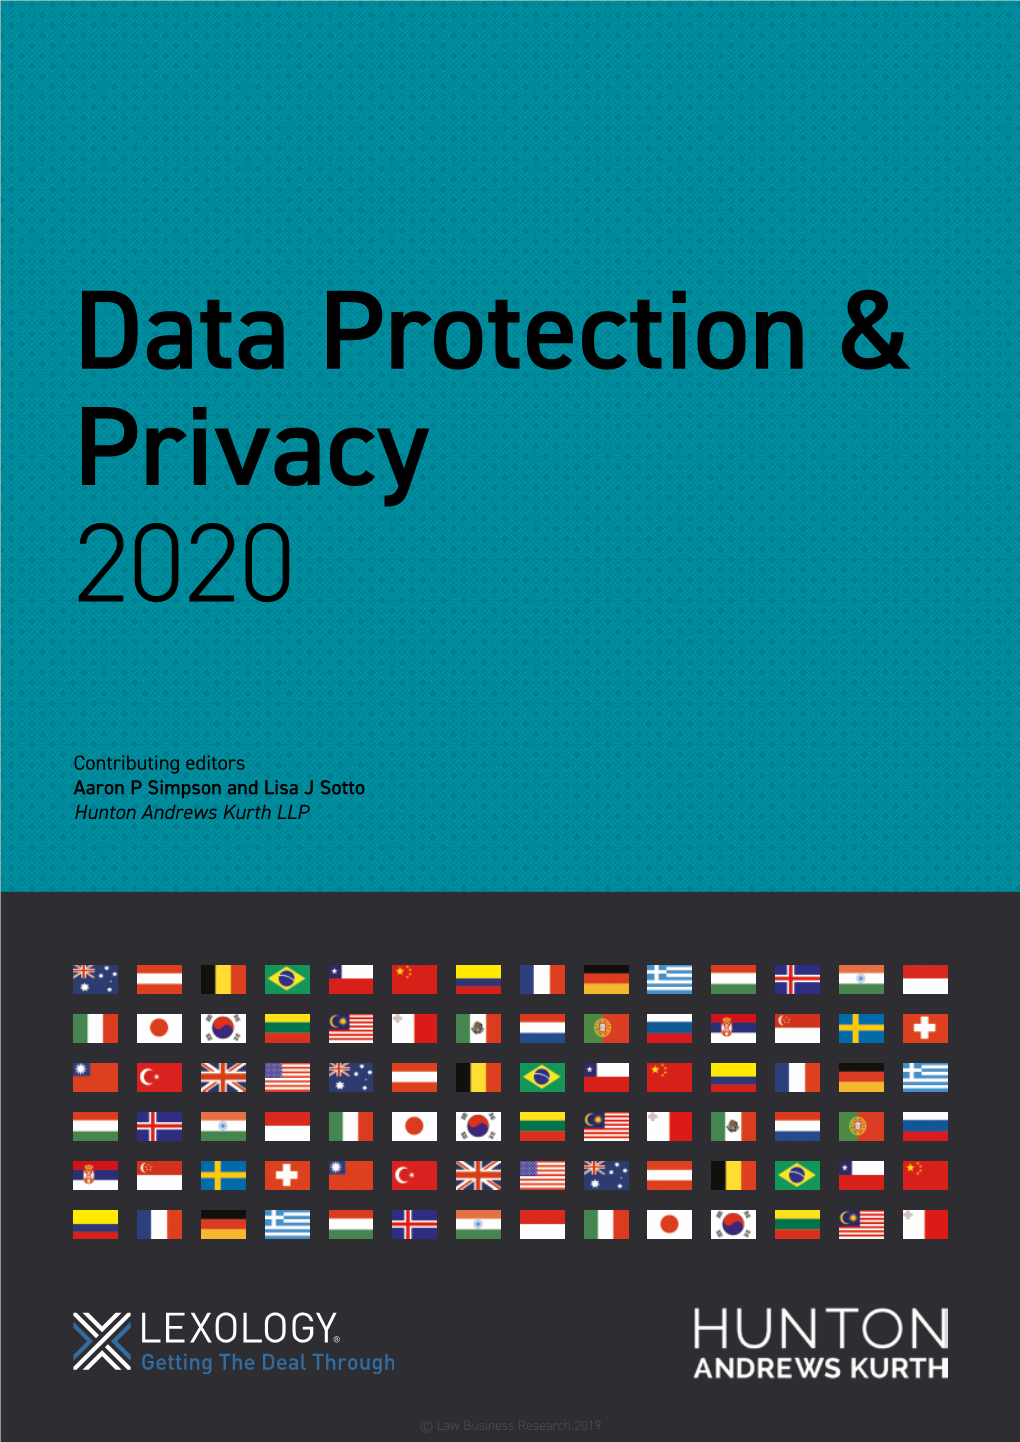 Data Protection & Privacy 2020